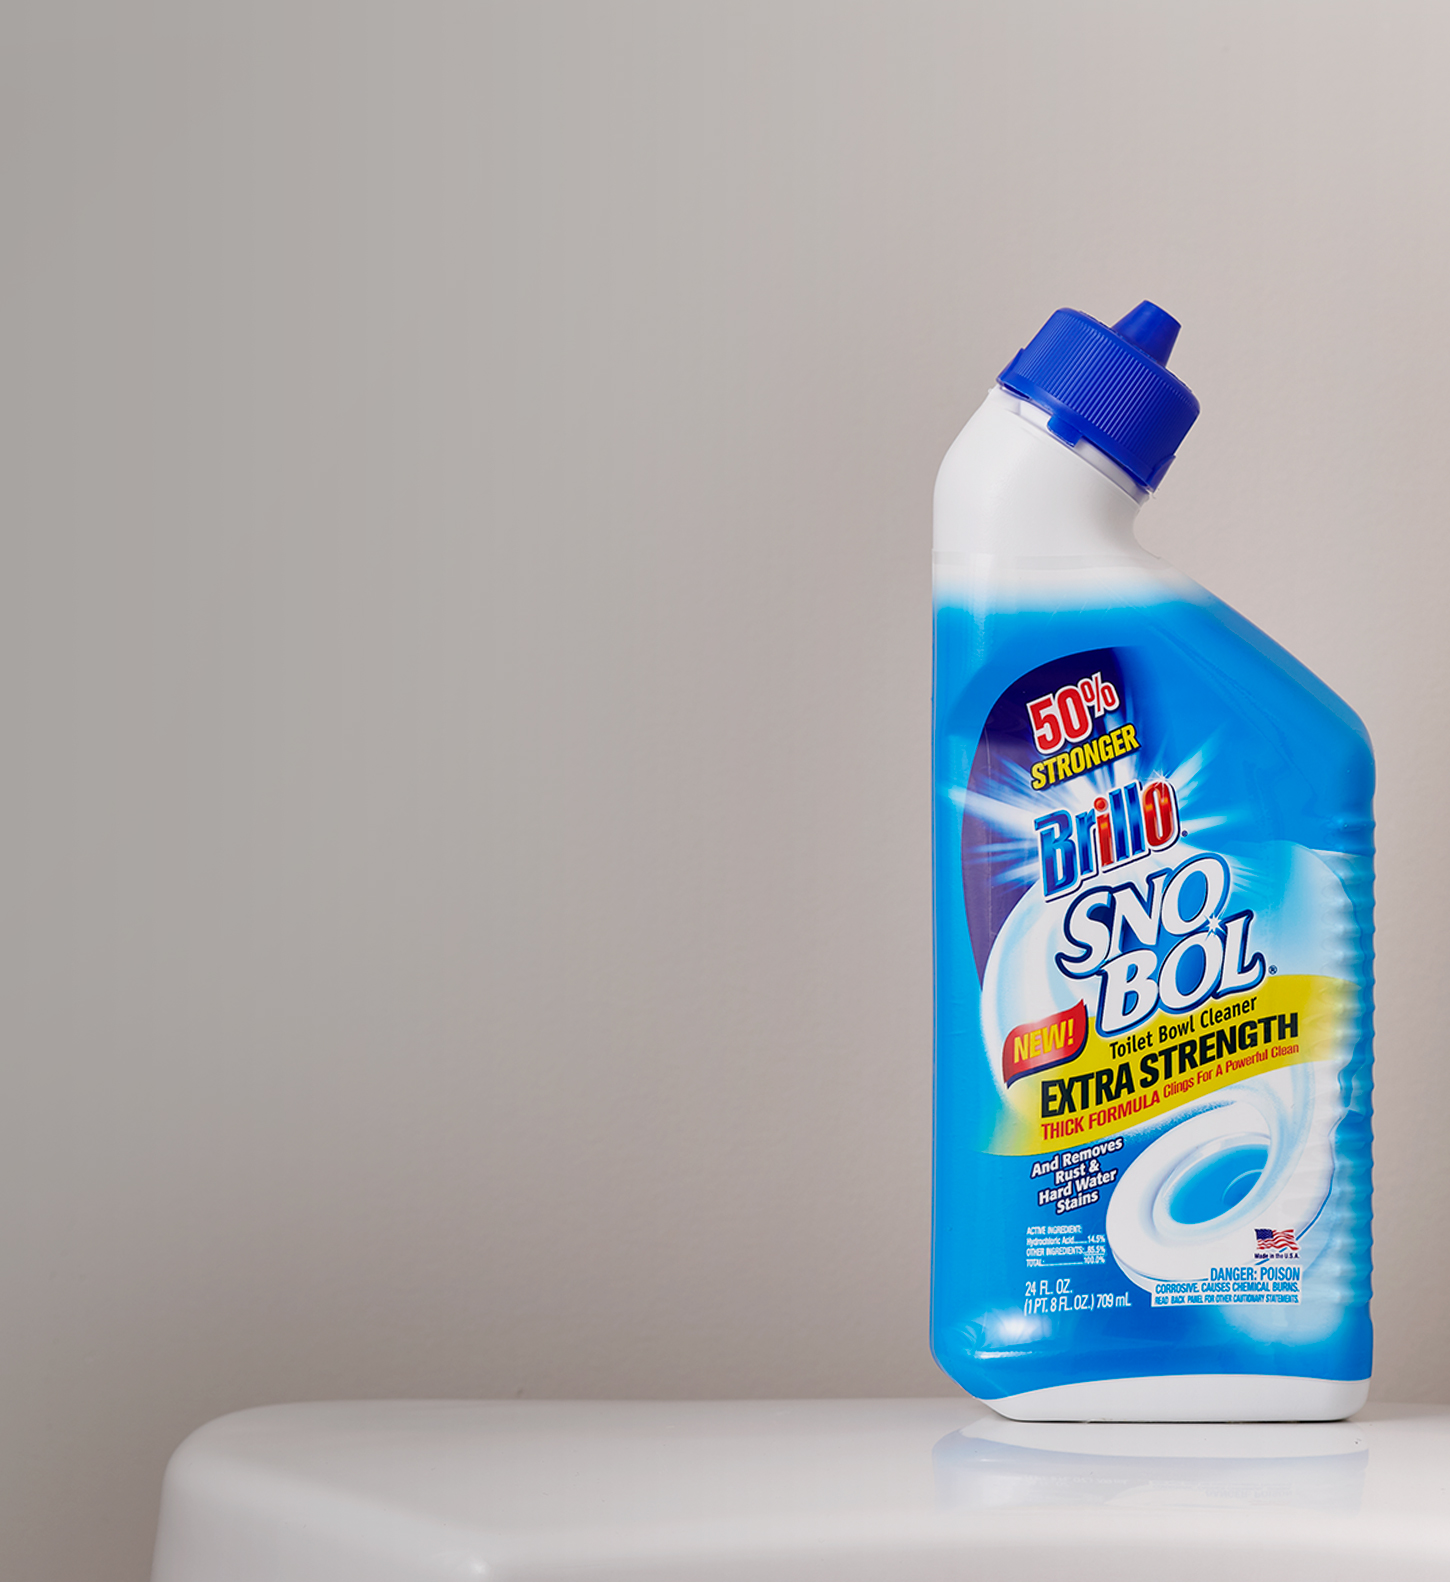 Sno Bol Extra Strength Toilet Bowl Cleaner